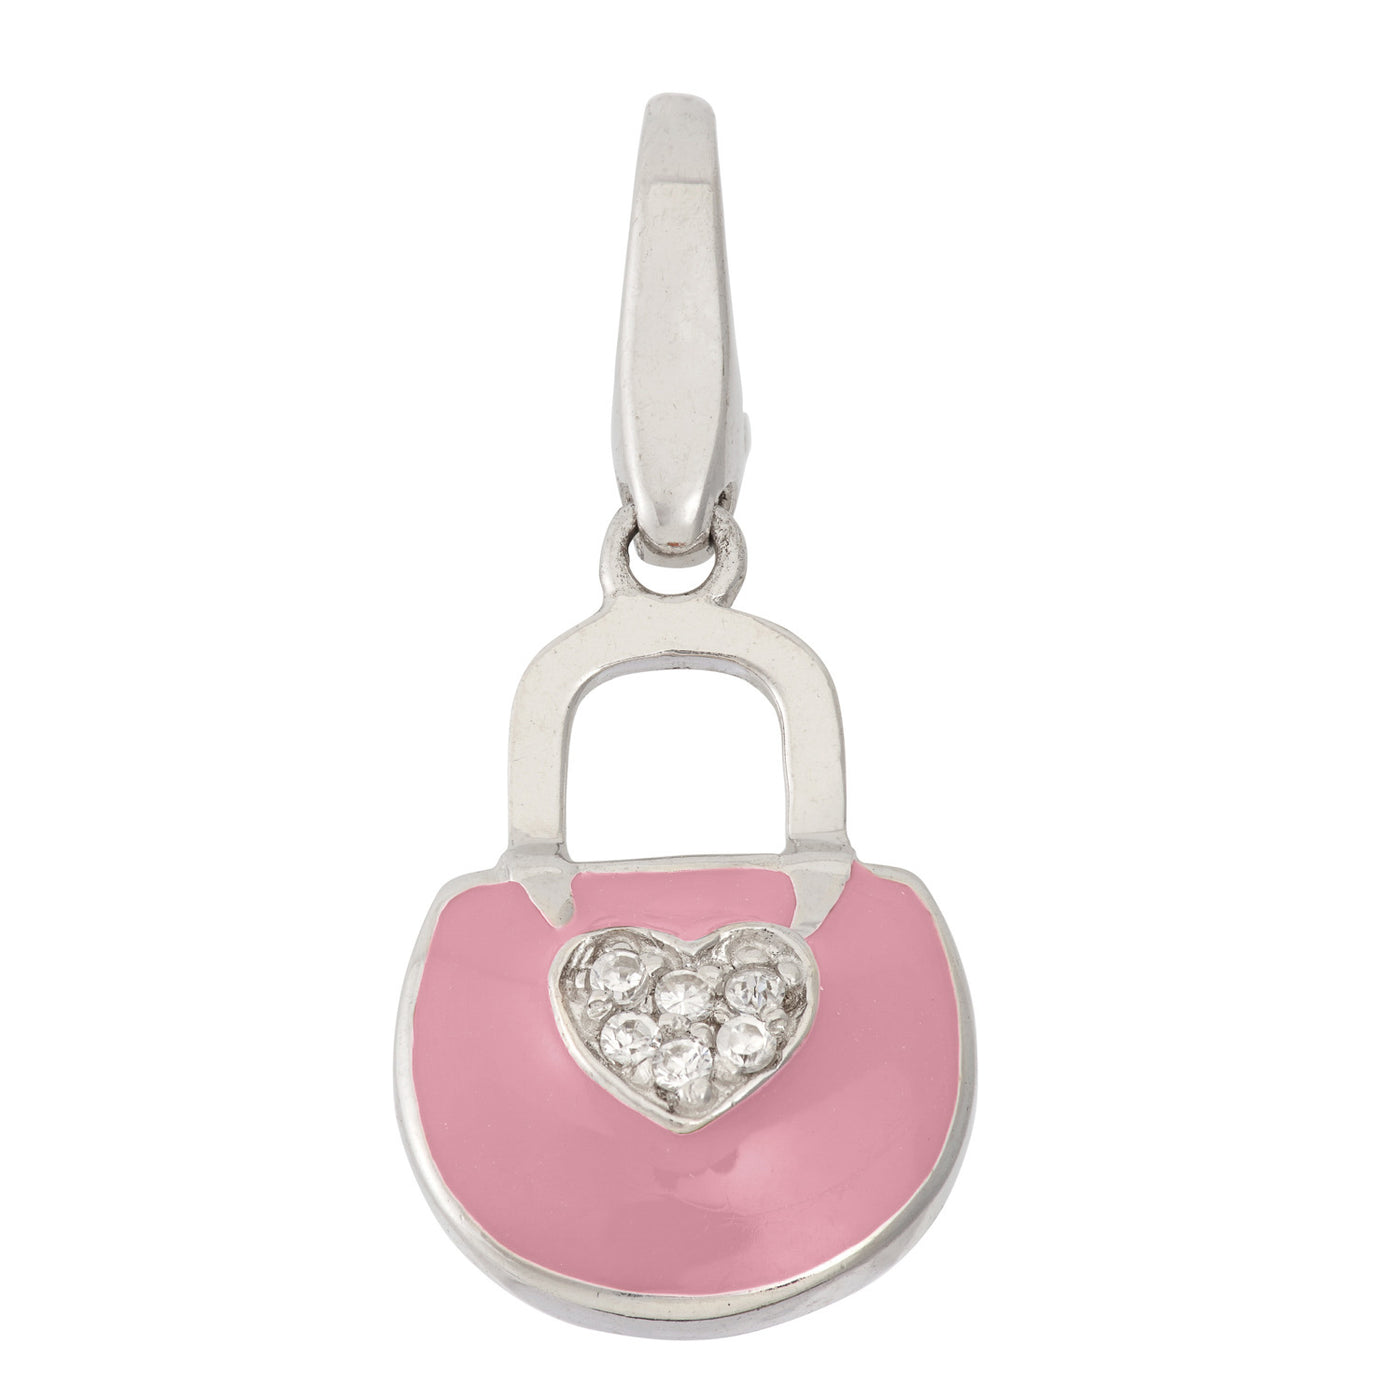 Rebecca Sloane Sterling Silver Pink Pocketbook With CZ Charm